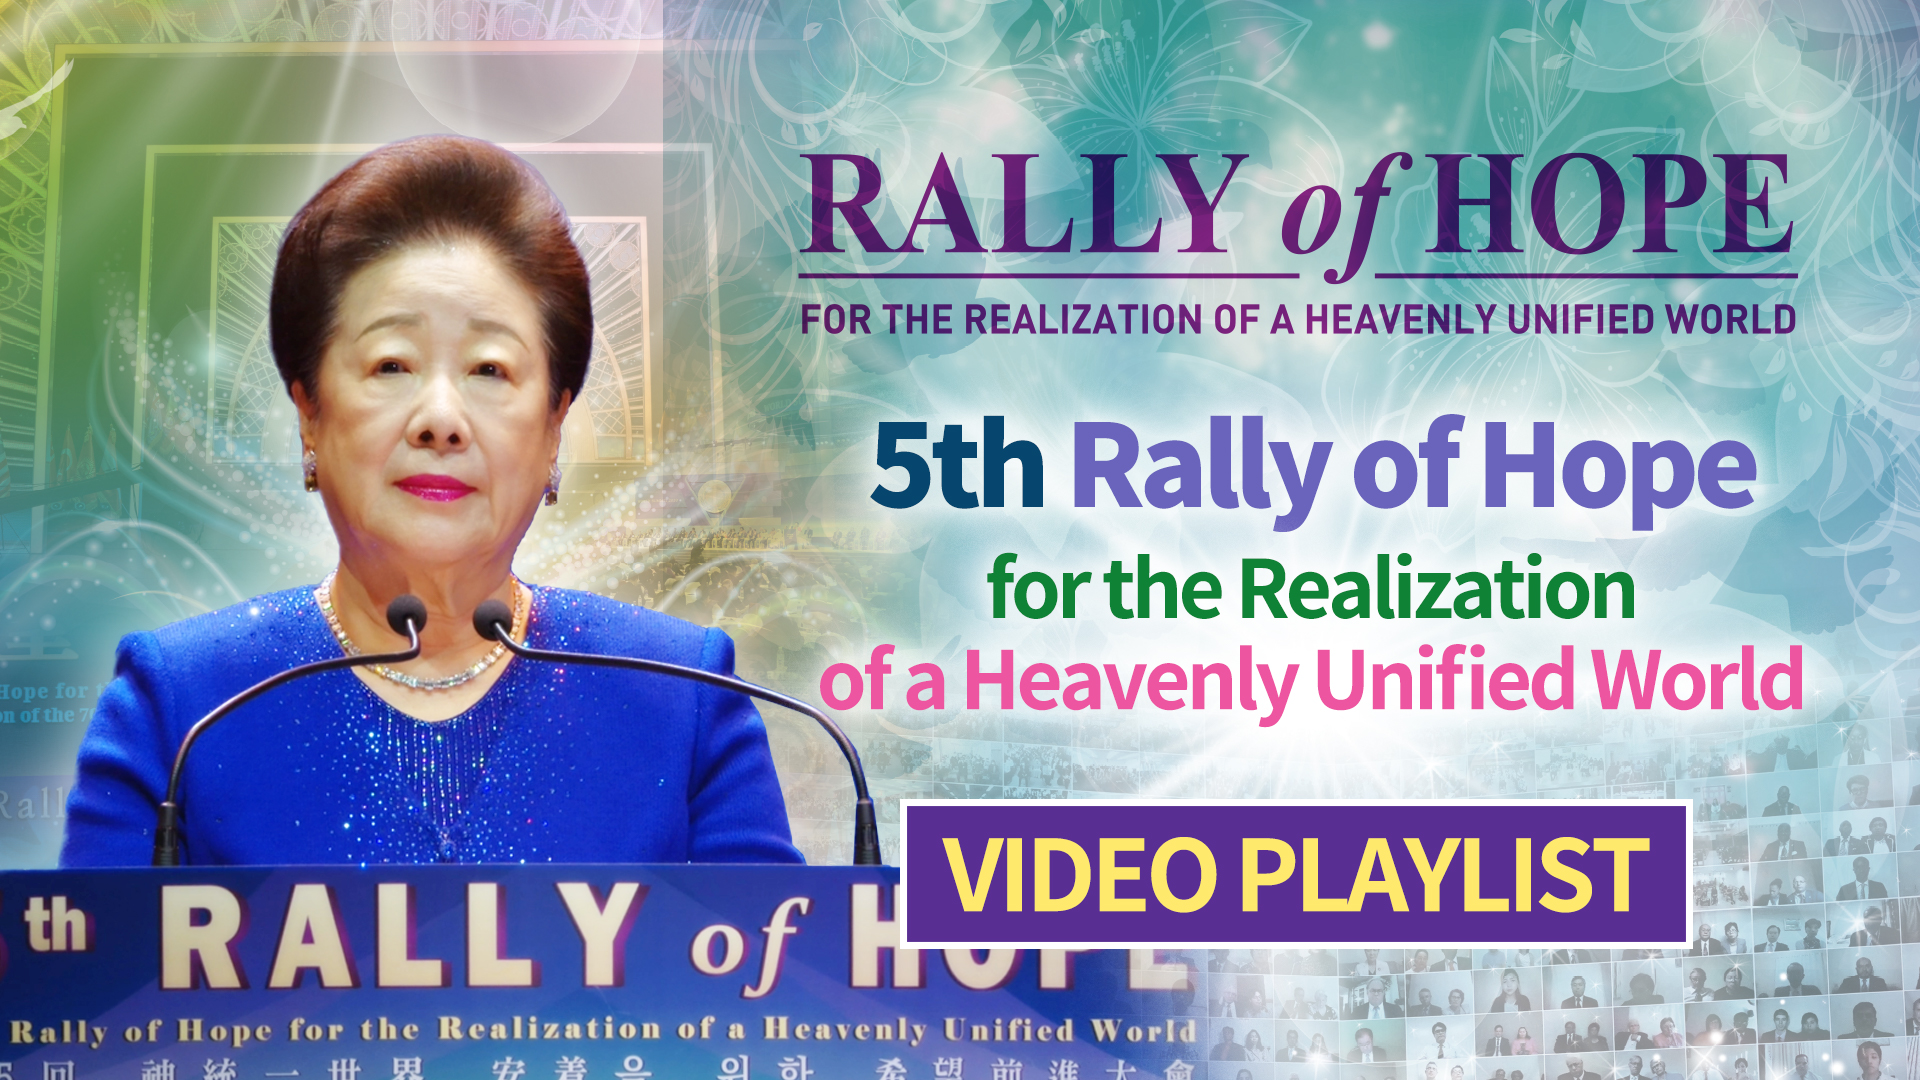 5th Rally of Hope for the Realization of a Heavenly Unified World